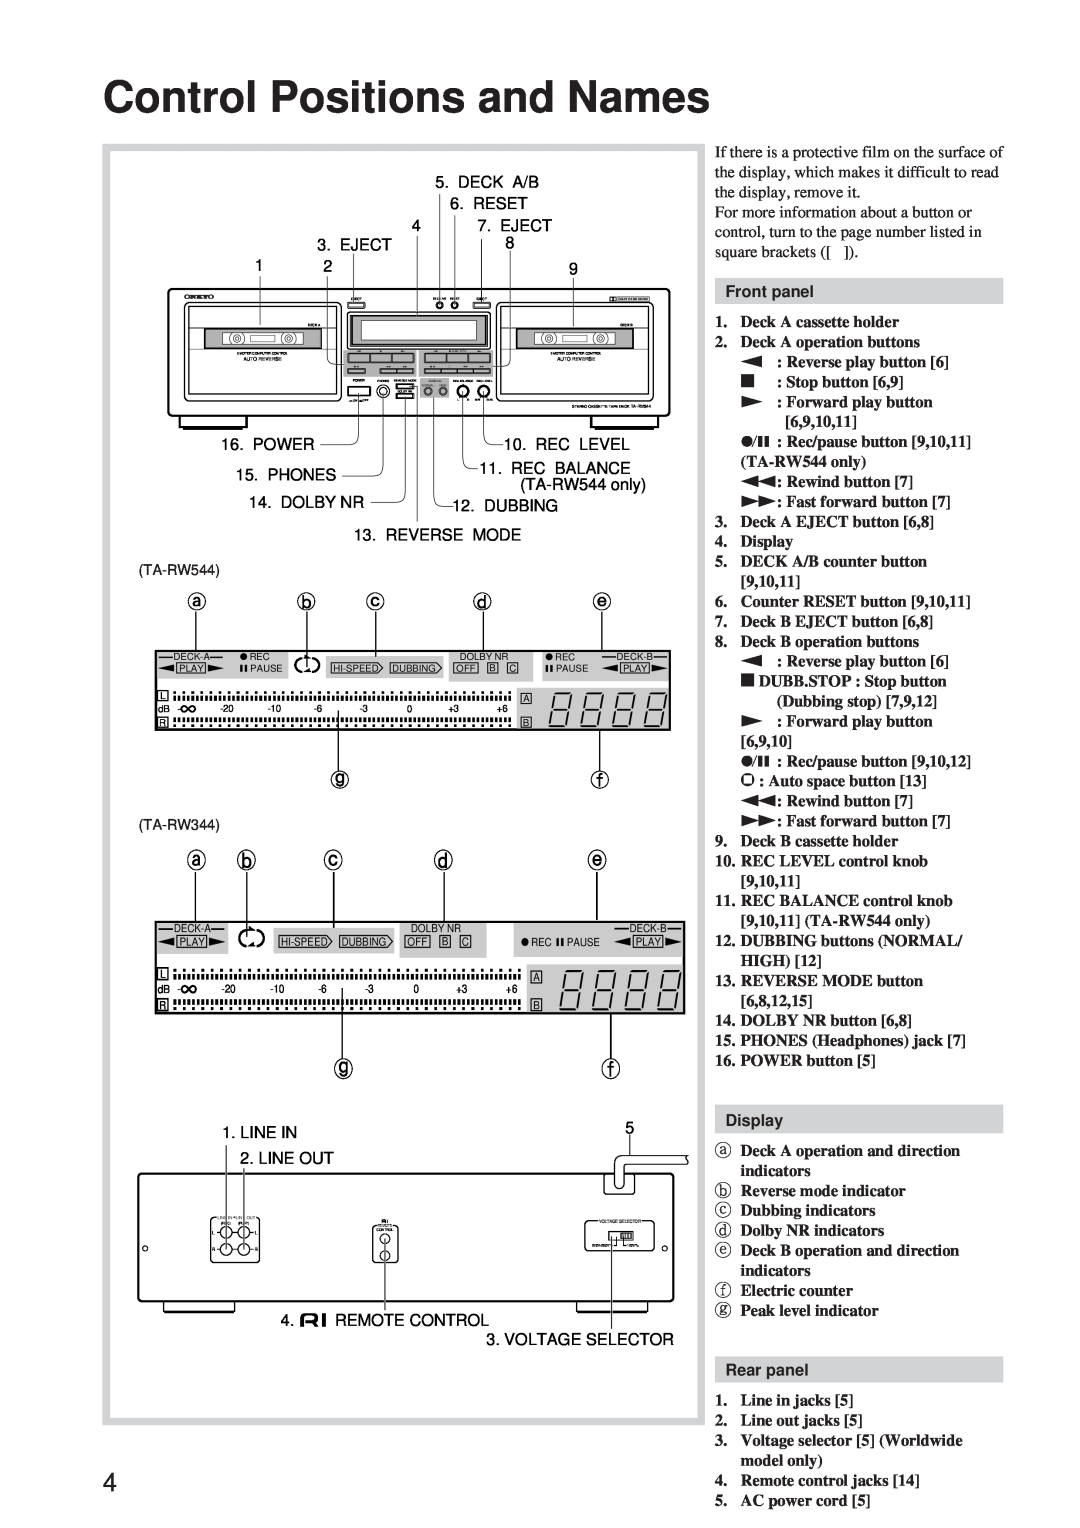 Onkyo TA-RW544, TA-RW344 instruction manual Control Positions and Names, Front panel, Display, Rear panel 